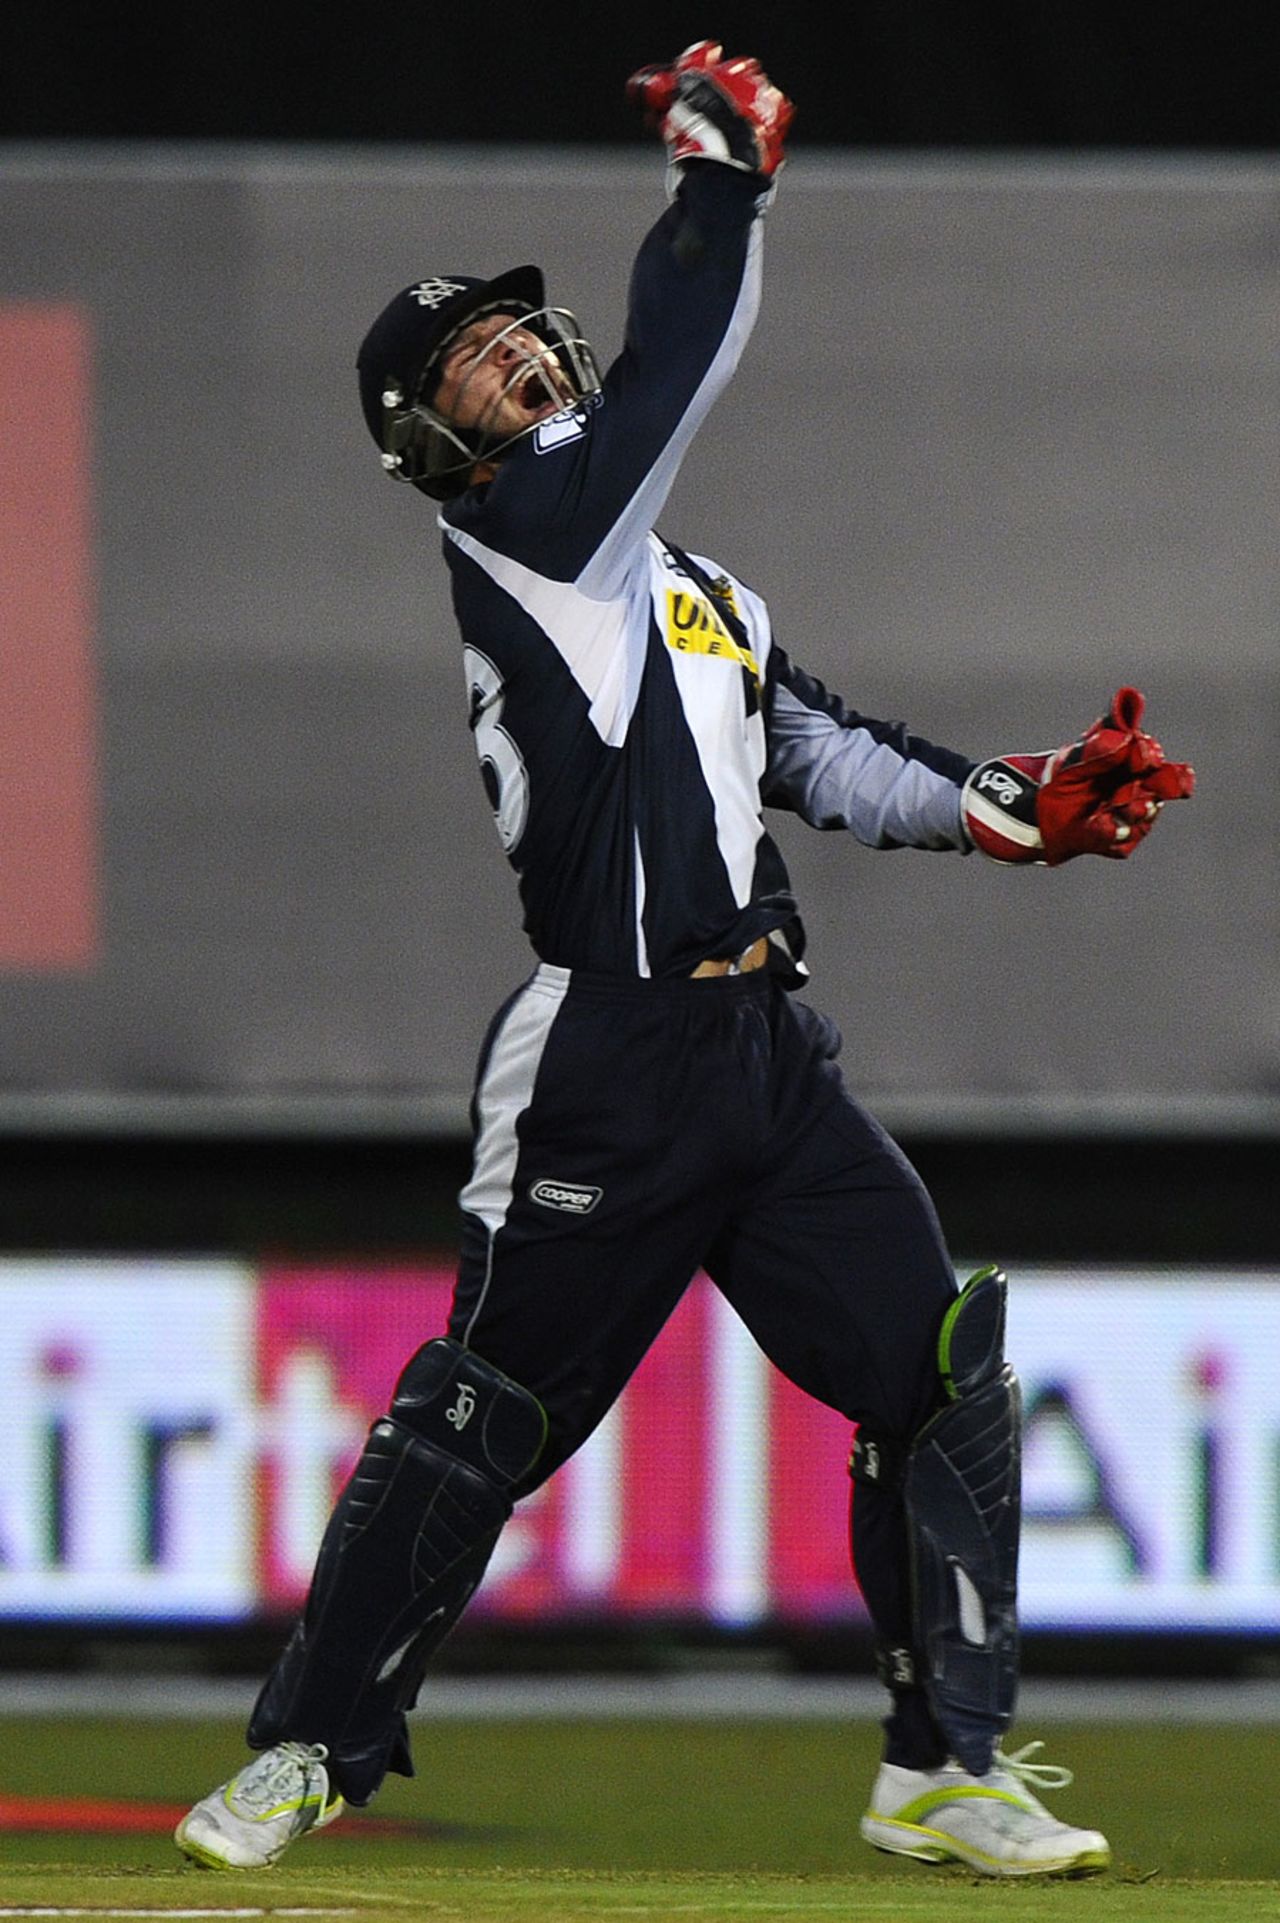 Matthew Wade is delighted after catching Ashwell Prince, Victoria v Warriors, Champions League Twenty20, Port Elizabeth, September 13, 2010